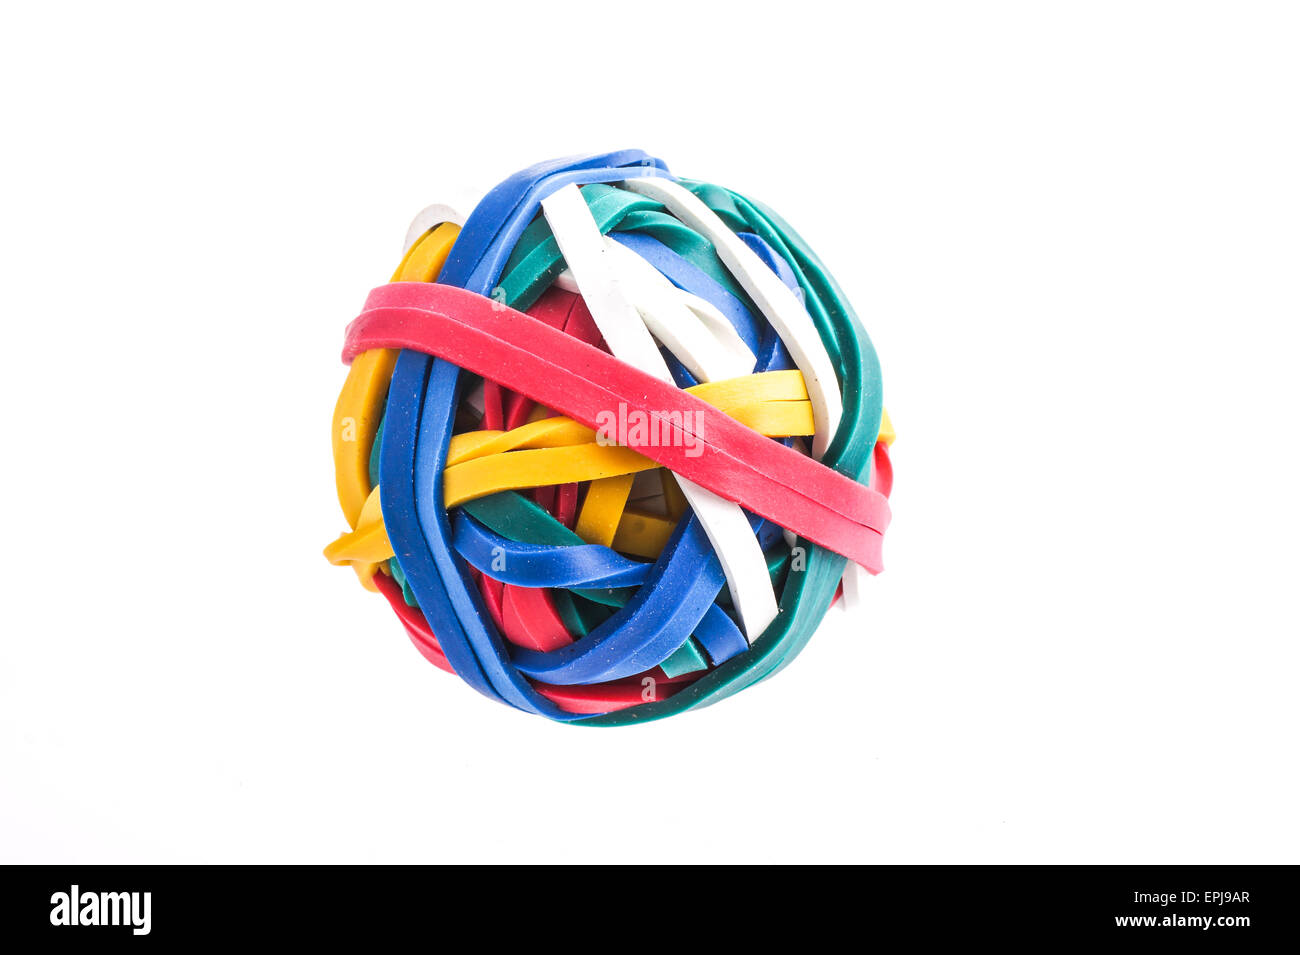 Multi color Rubber band ball isolated on white Stock Photo